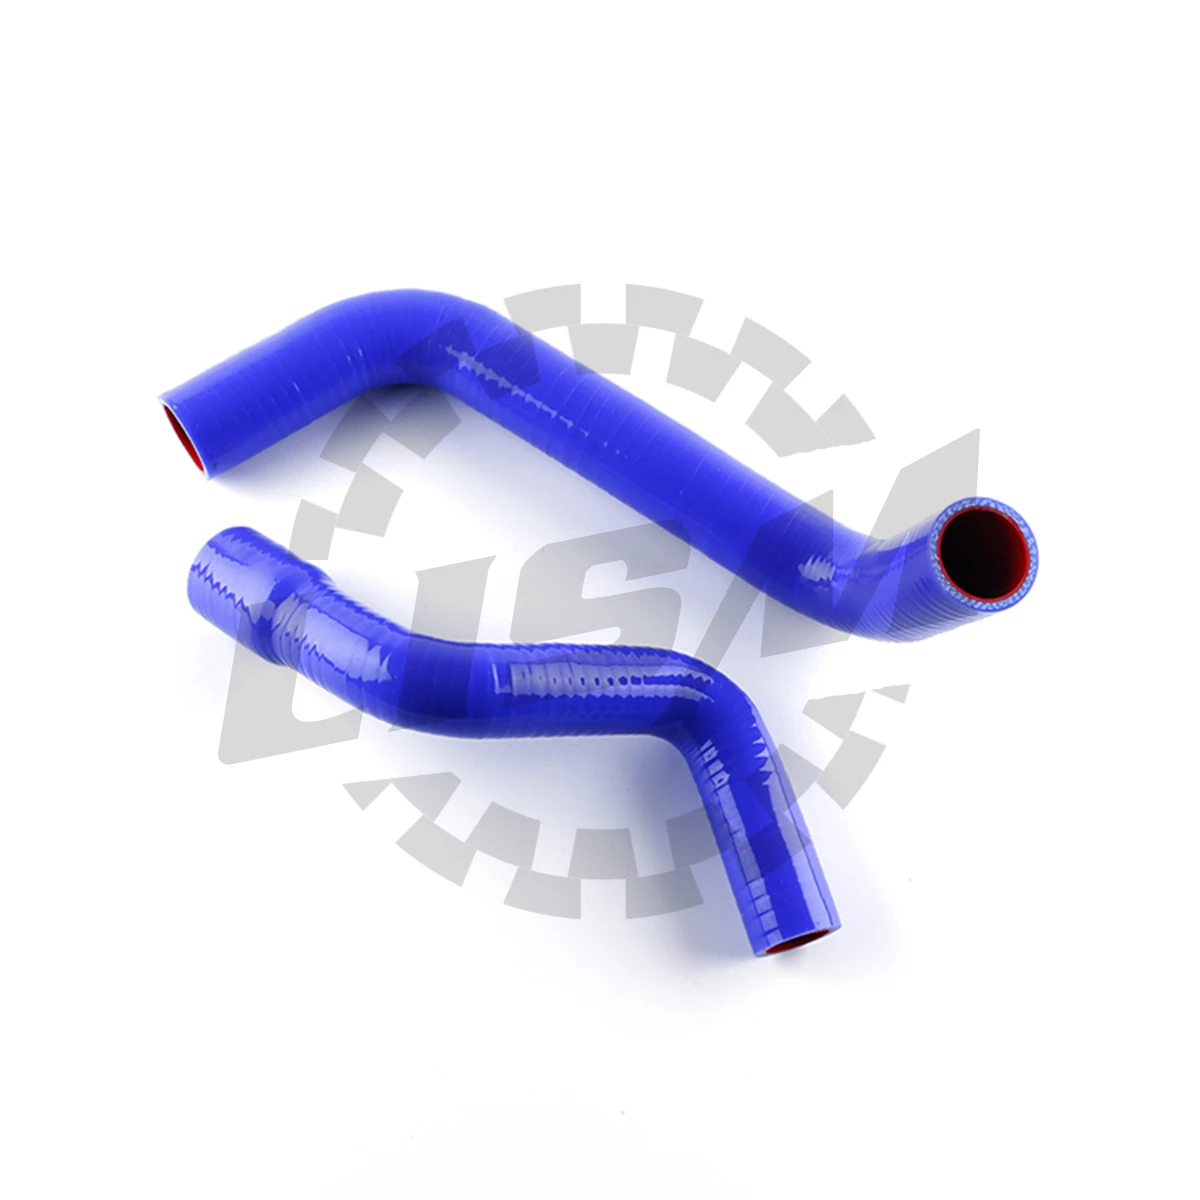 

For 2000-2007 Mitsubishi Lancer 4G18 1.6L 2001 2002 2003 2004 2005 2006 3-ply Silicone Radiator Coolant Hose Kit Upper and Lower